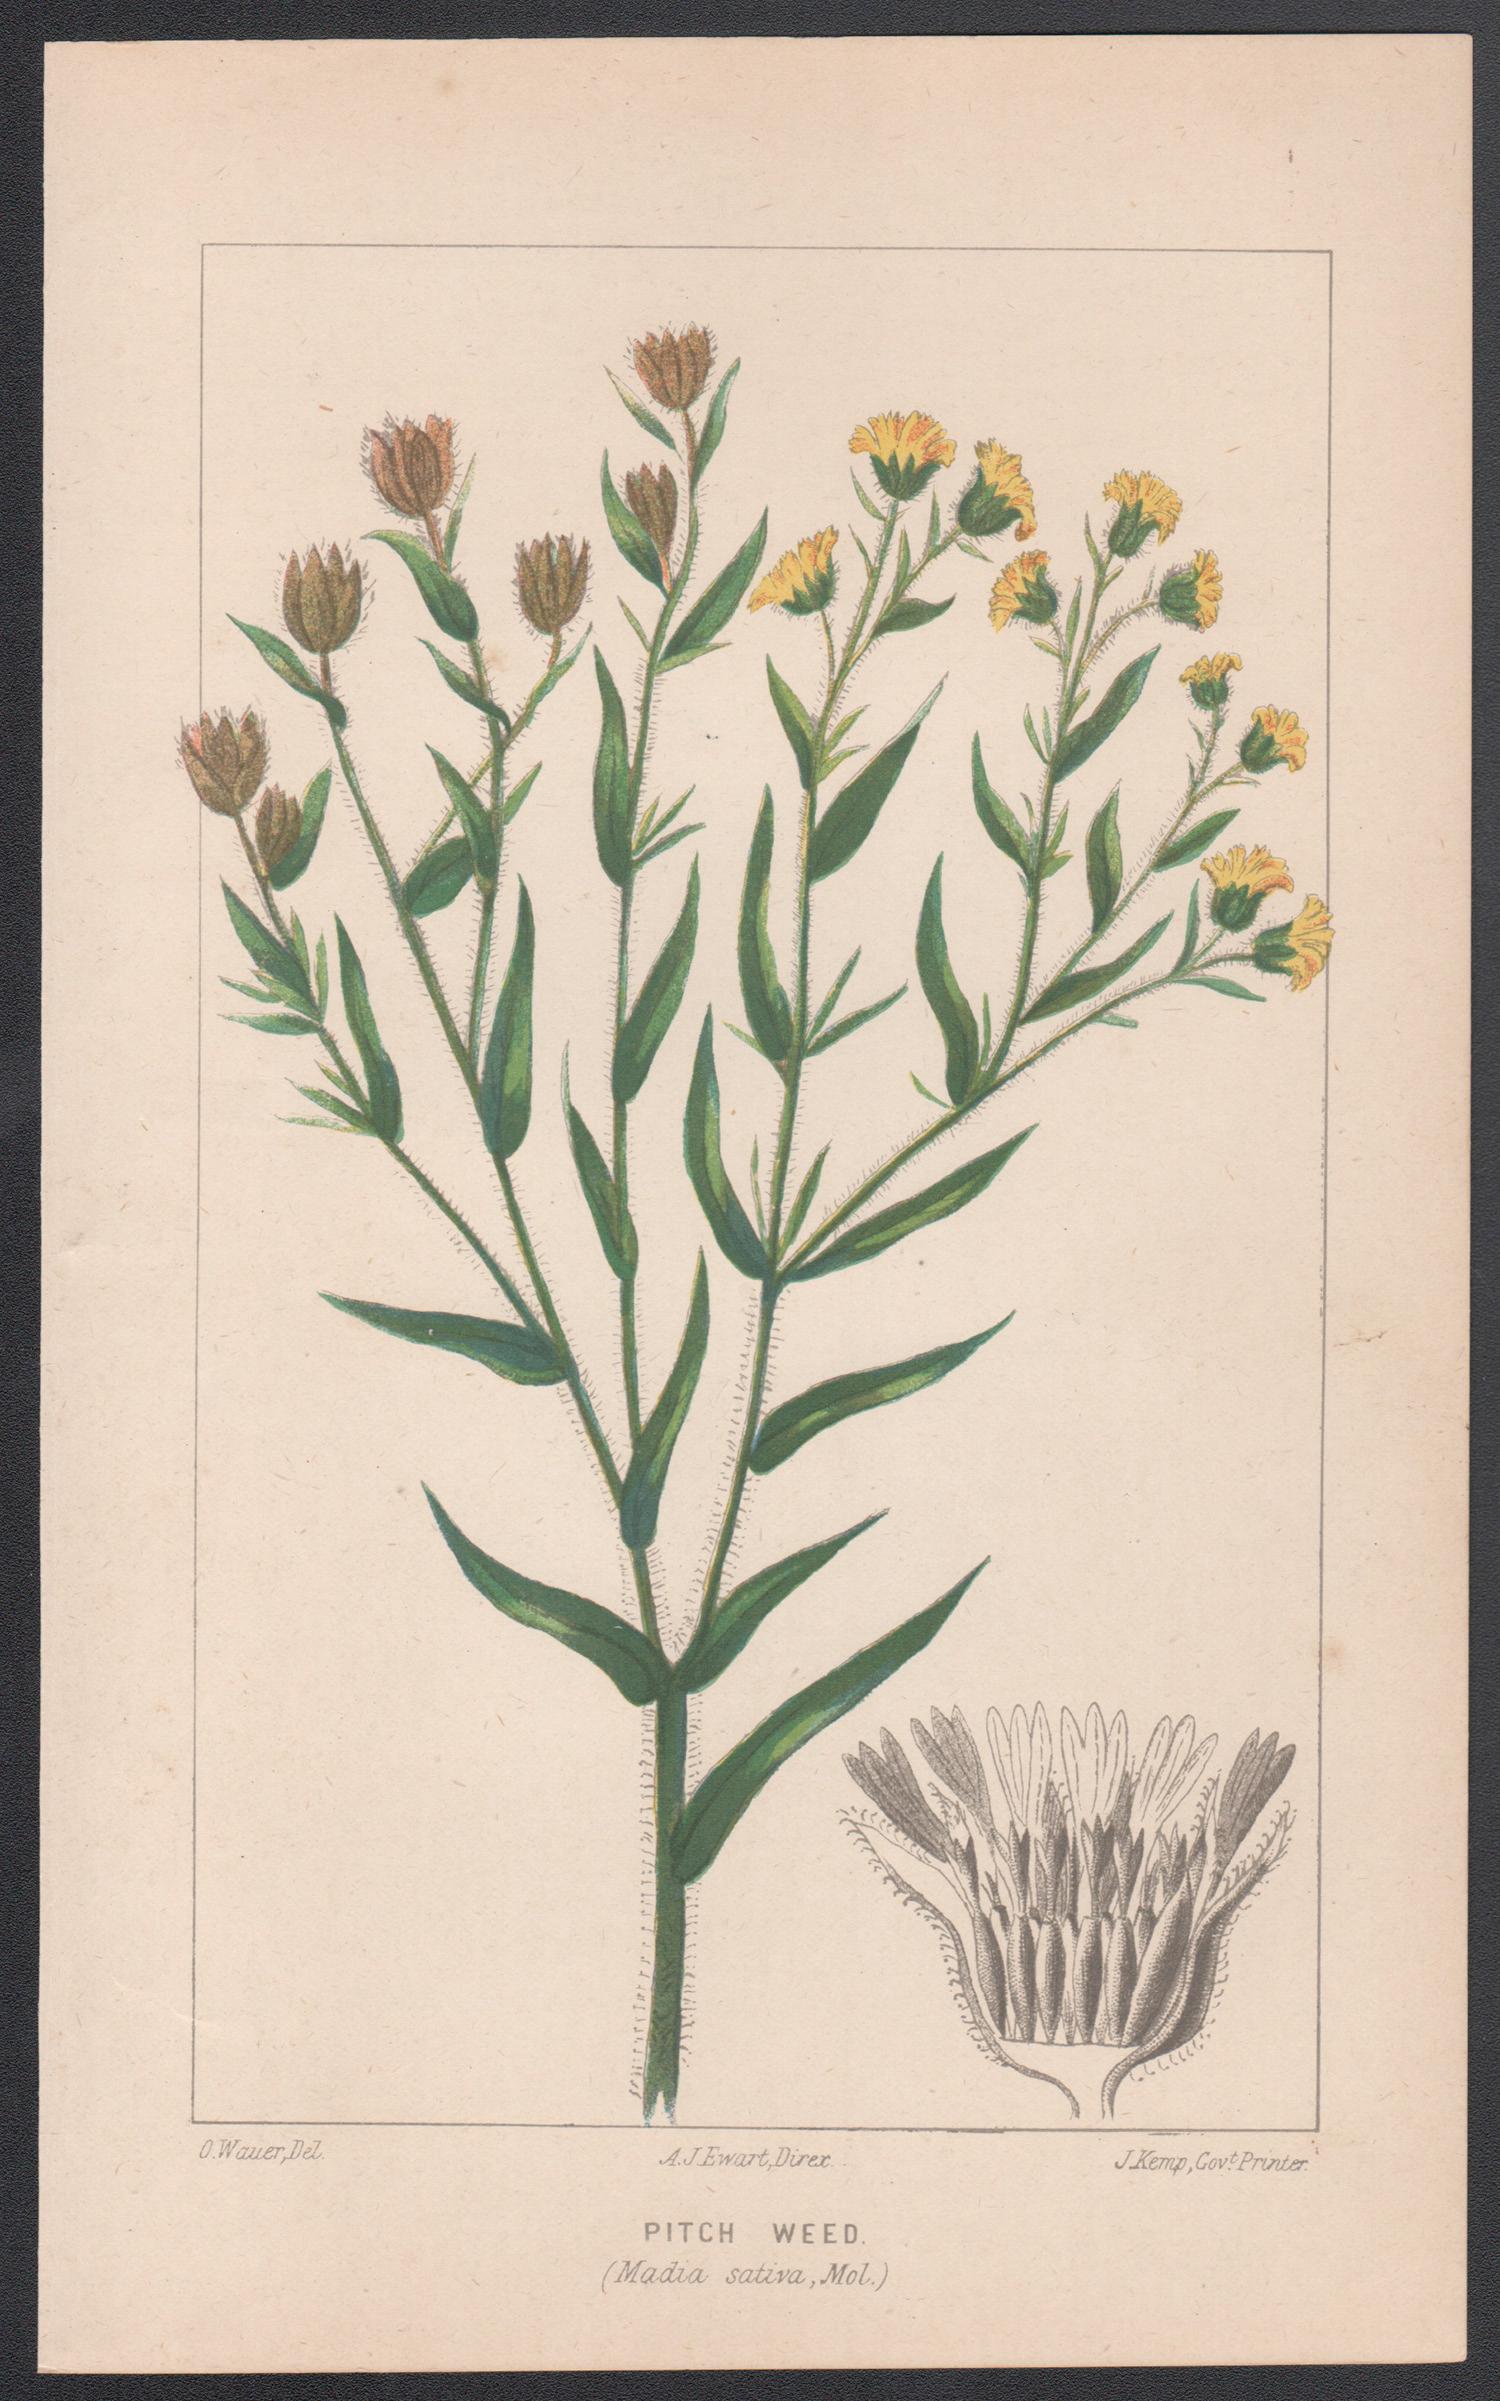 Pitch Weed (Madia Saliva, Mol), antique botanical plant lithograph - Print by O Wauer